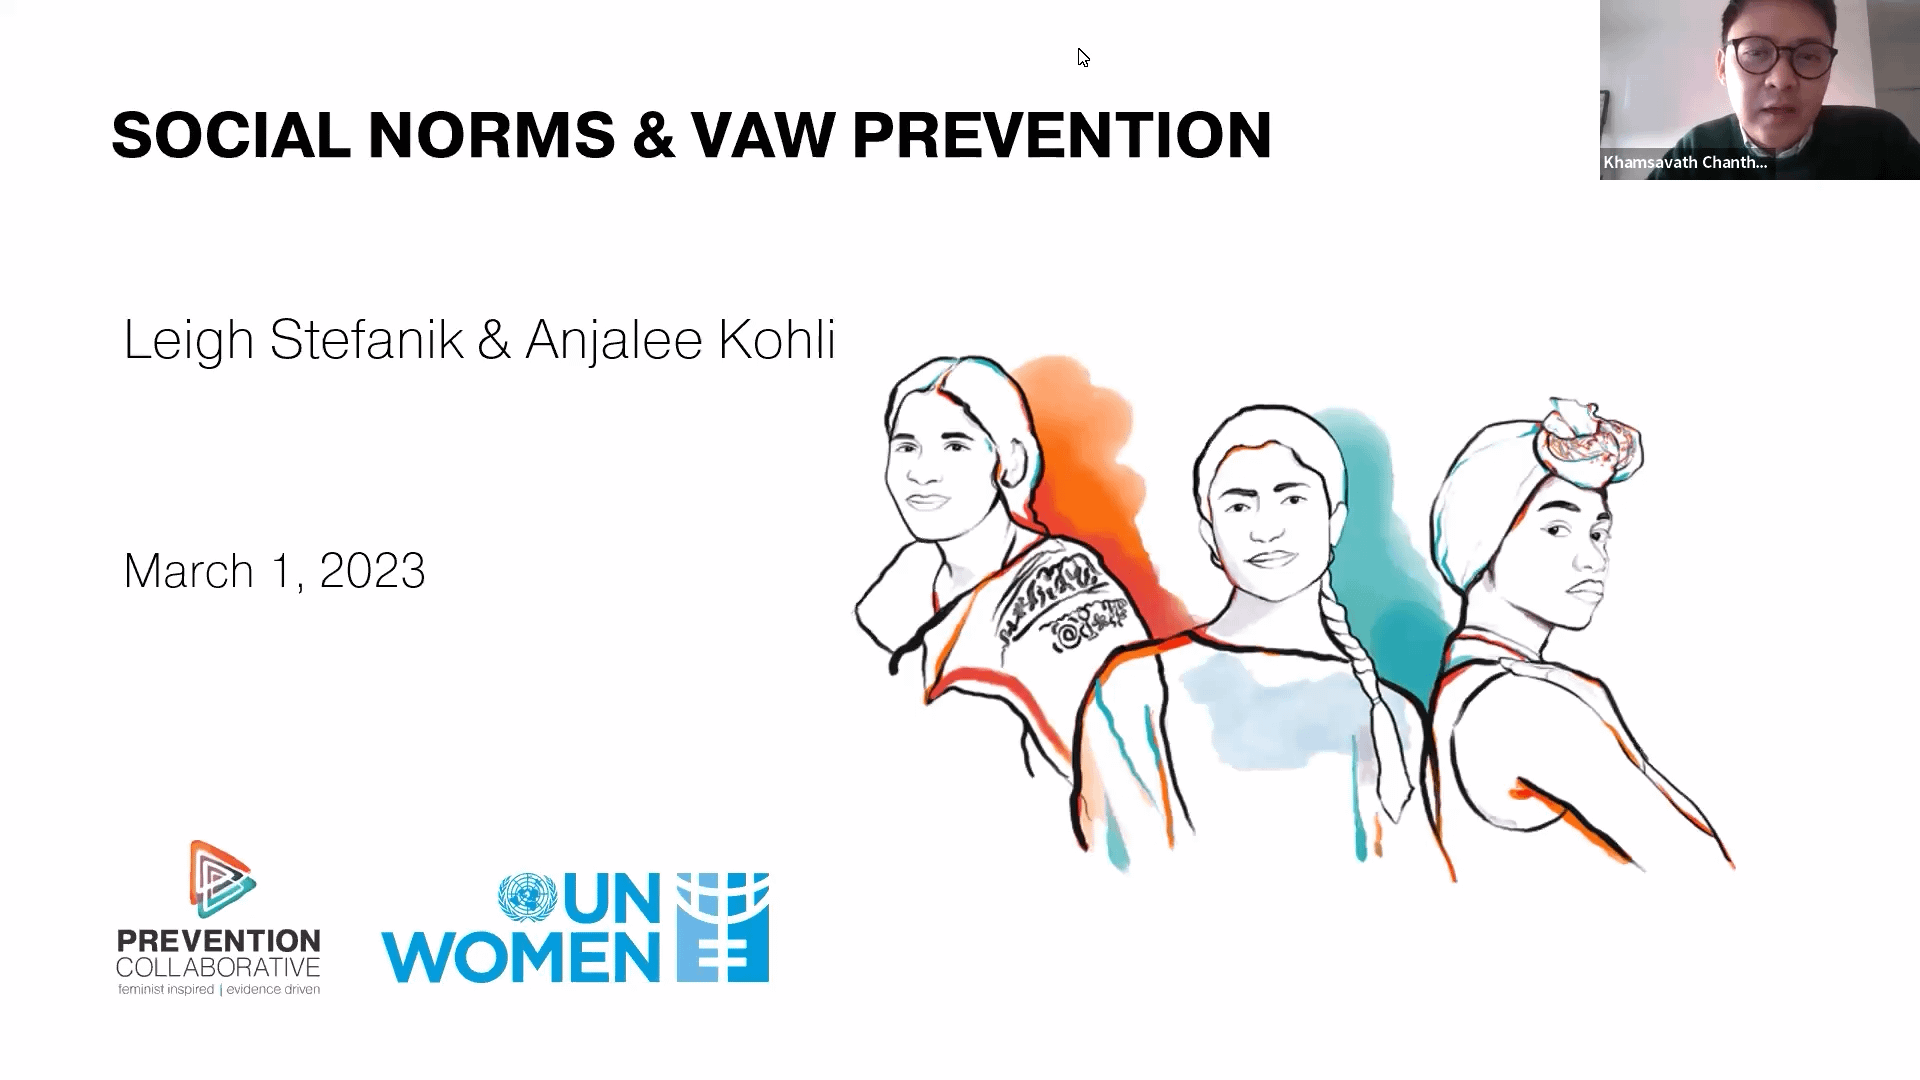 Watch The Webinar On The Social Norms And Violence Against Women Prevention, Co-produced By The Prevention Collaborative And UN Women.